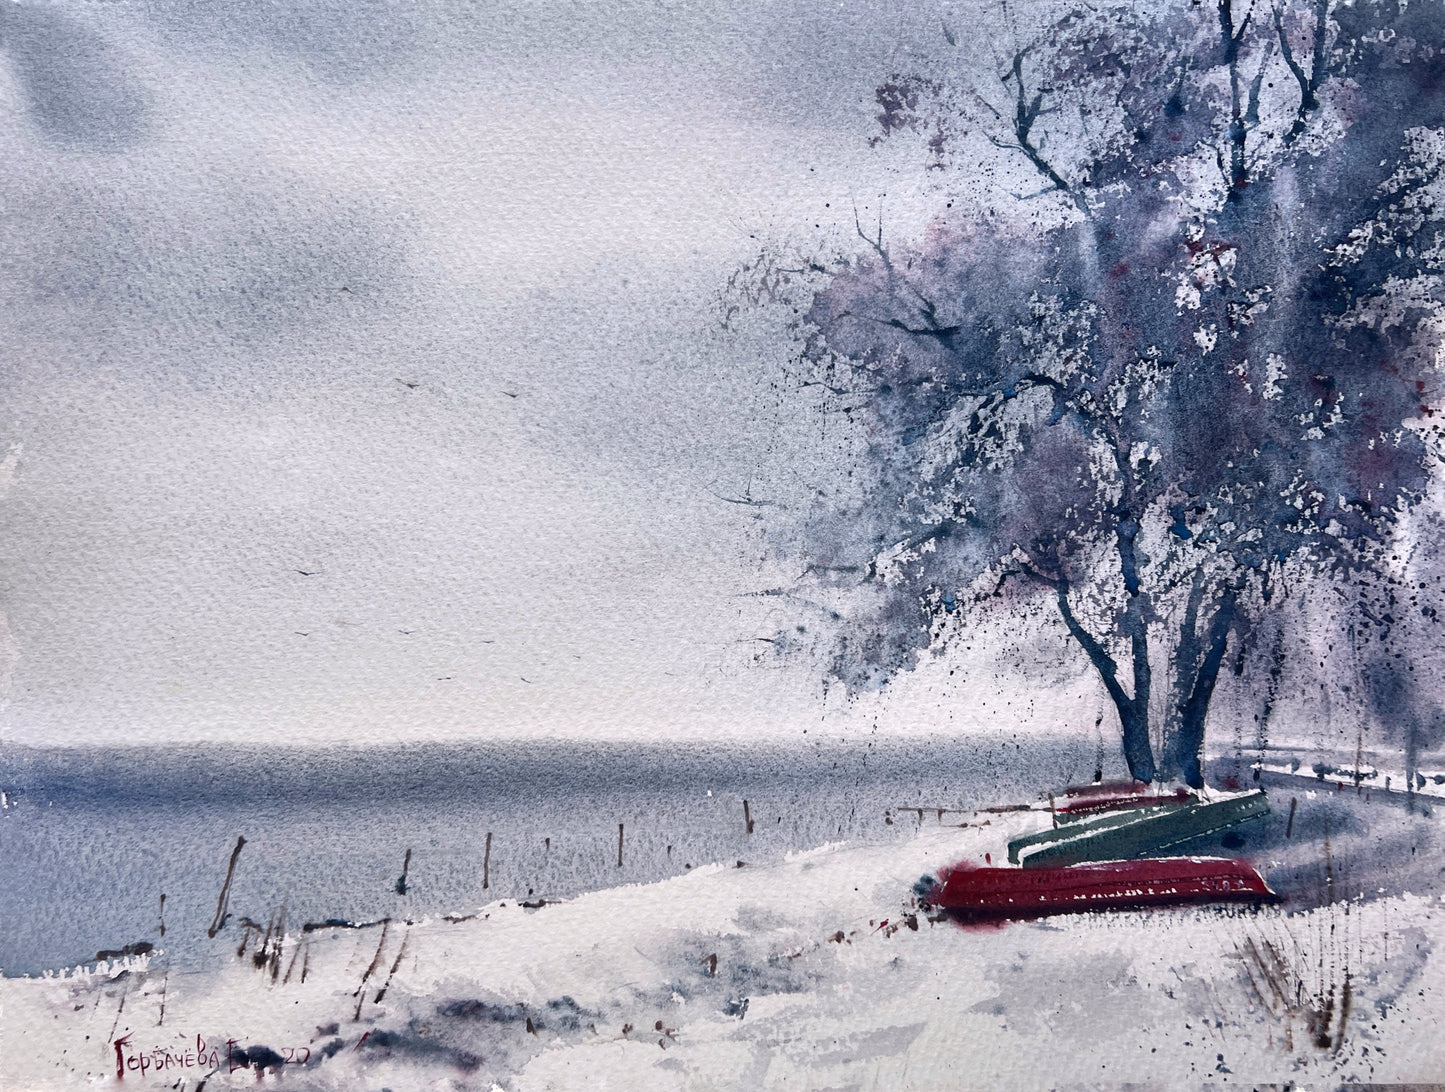 Lake Landscape Painting Watercolor Original, Winter Art, Country House Wall Decor, Rowing Boat, Trees, Nature Artwork